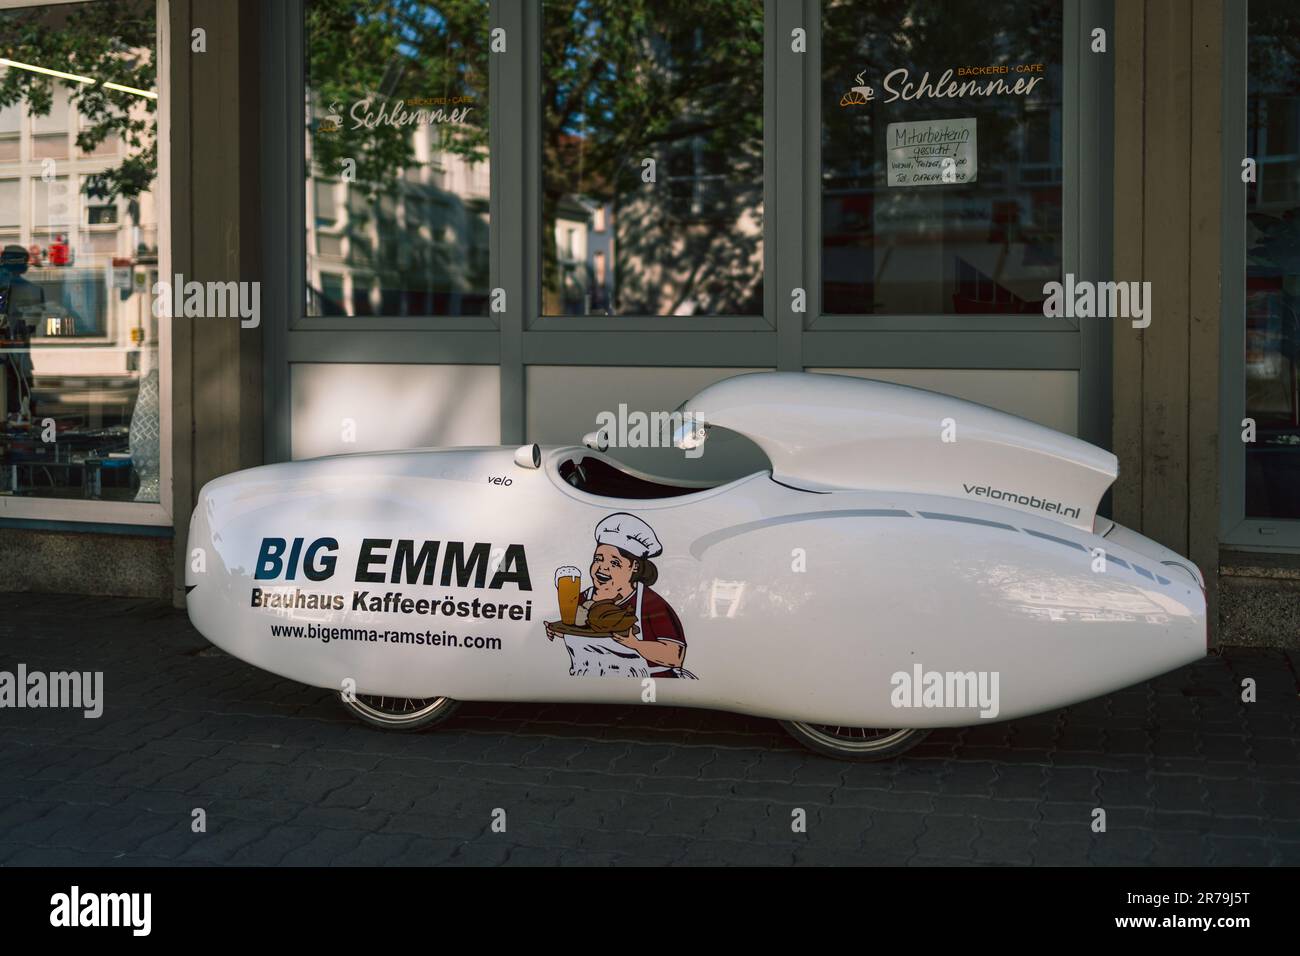 Futuristic looking four wheel (velomobile) vehicle parked in front of a store in Germany Stock Photo